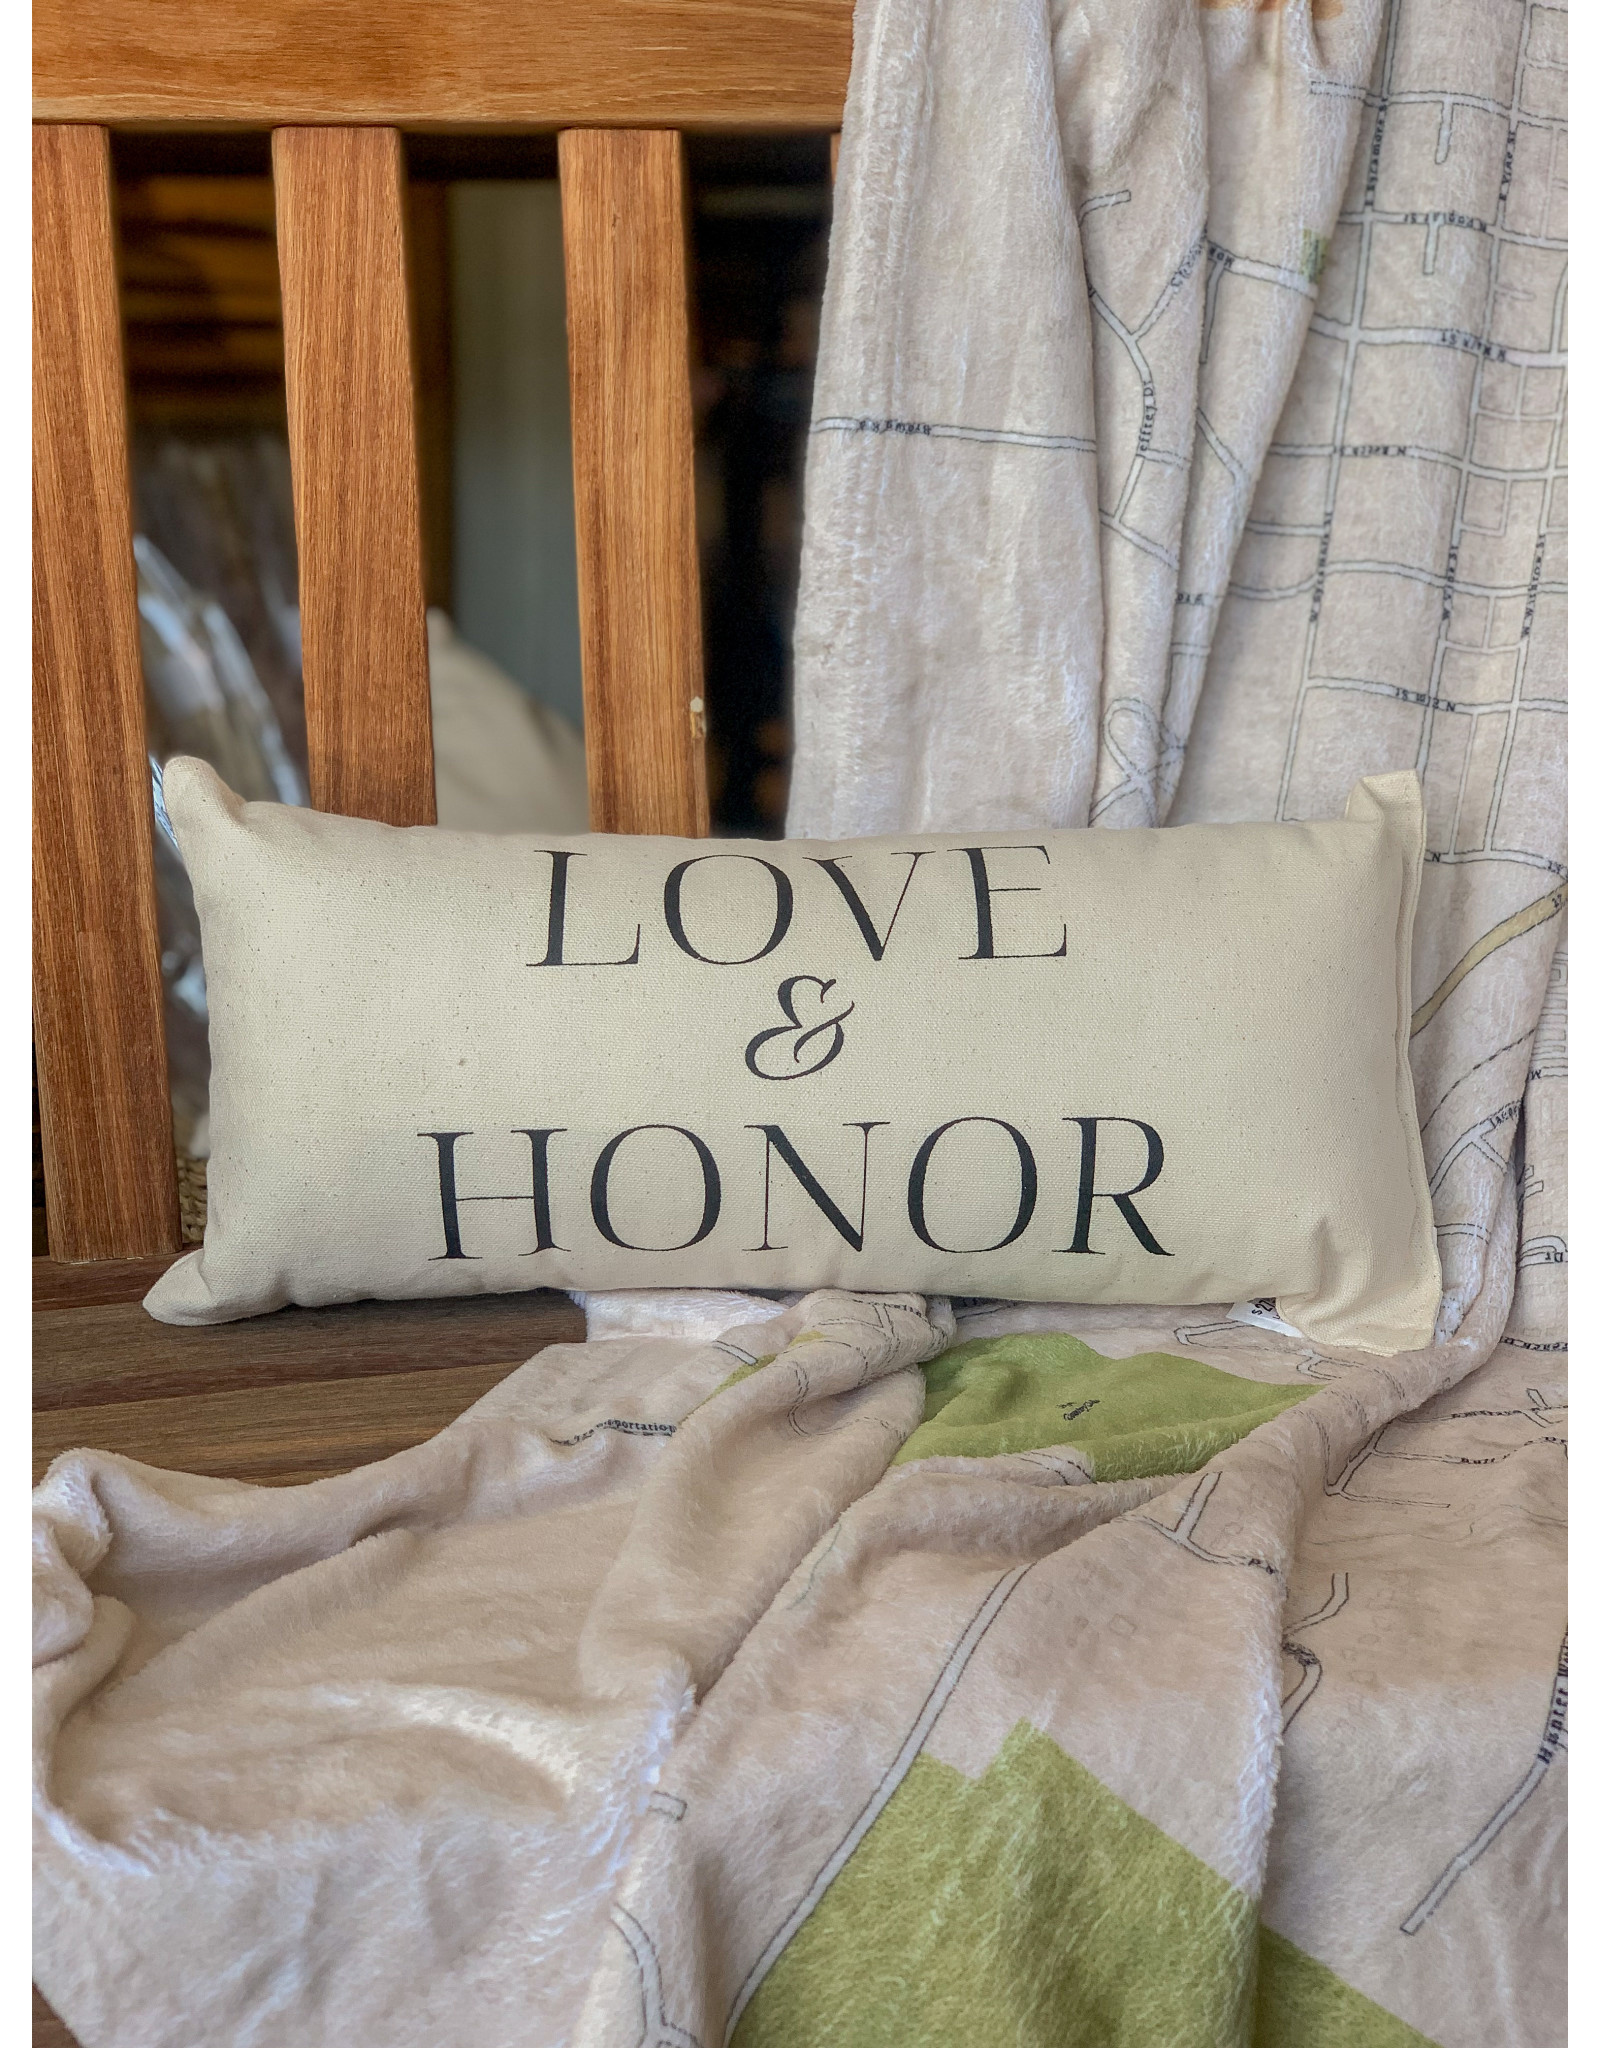 Eric and Christopher Love & Honor Pillow, small